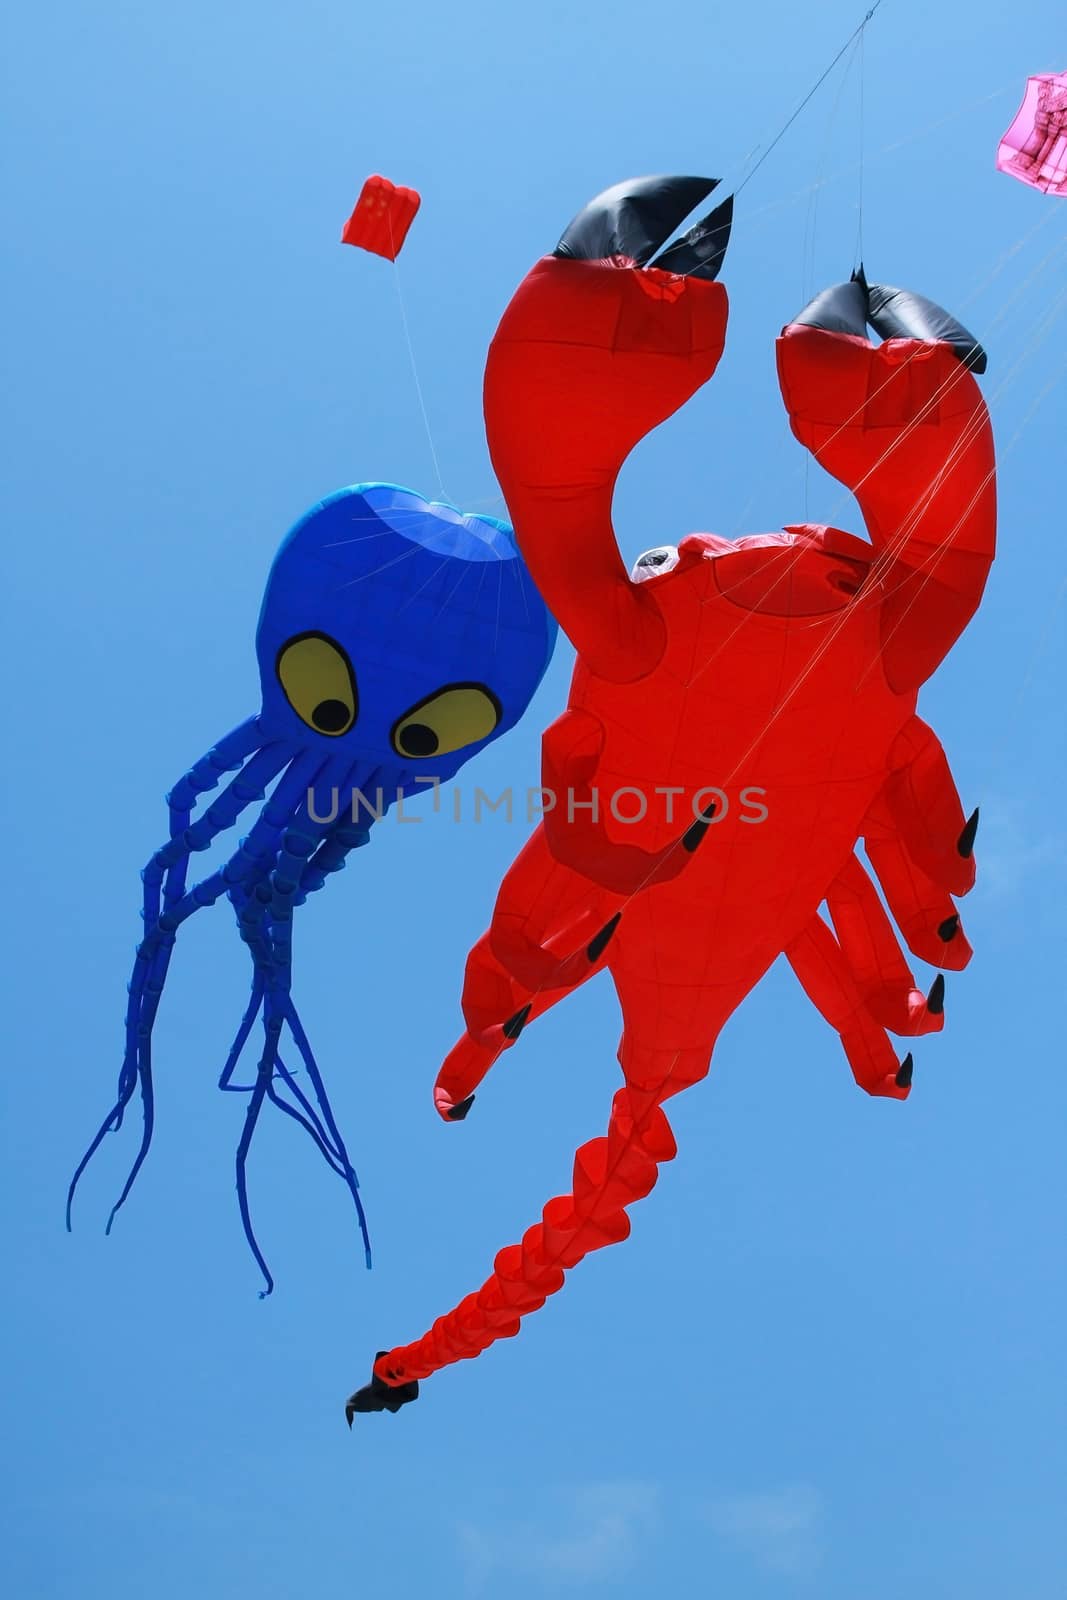 Kite with crab and cuttle 's shape flying in the air against blue sky